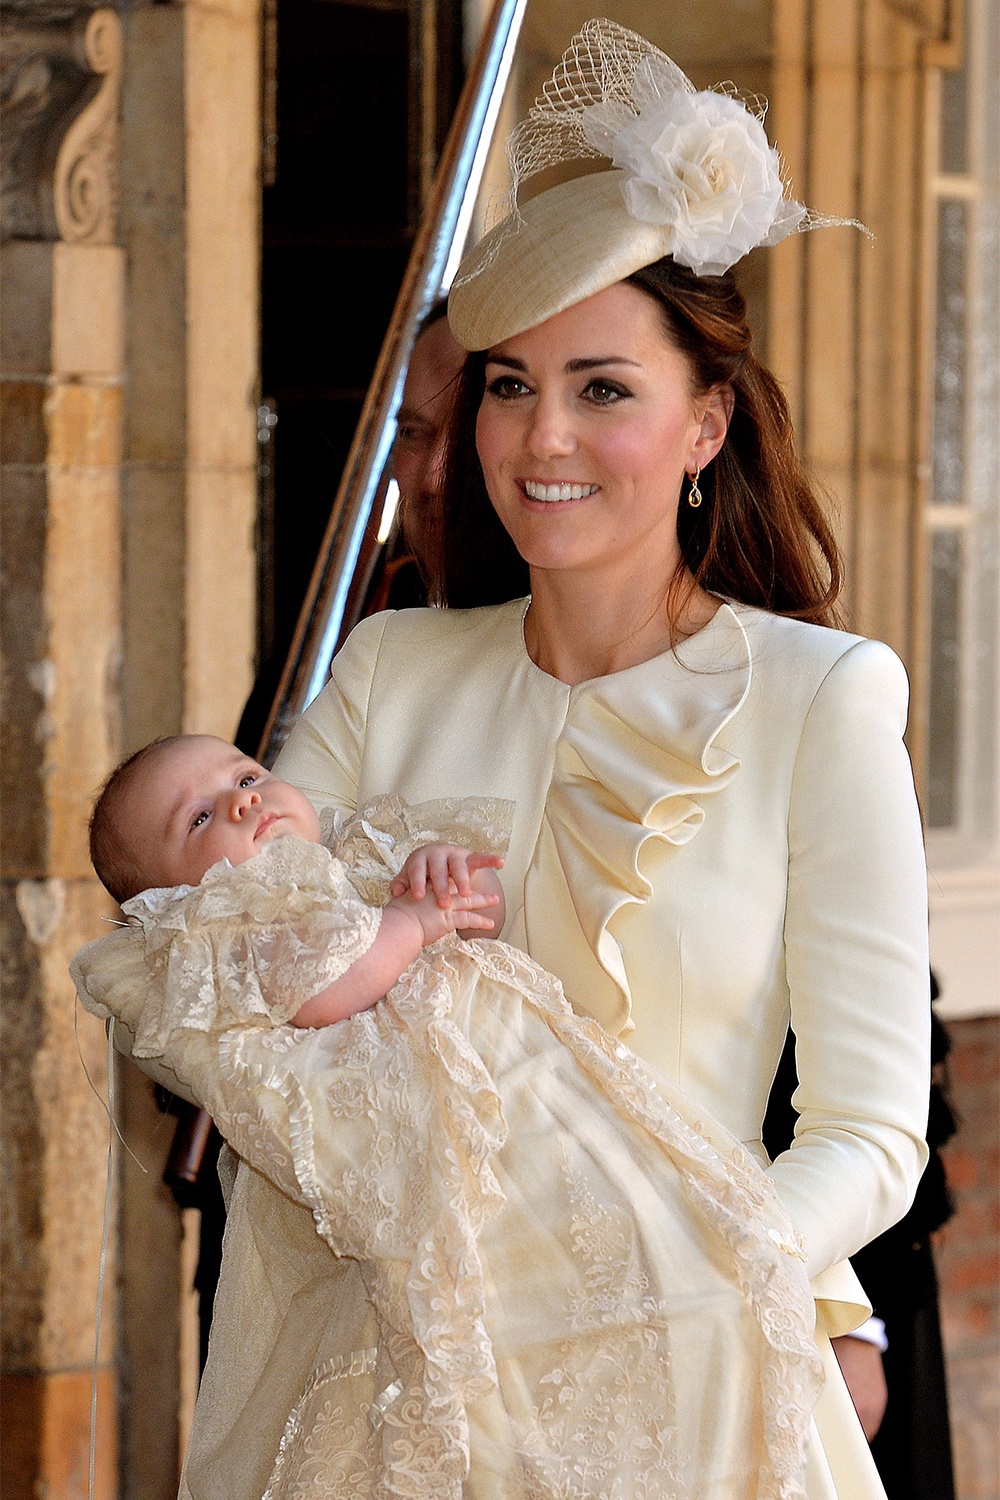 Prince George with his mother Catherine, in Alexander McQueen after his christening at the Chapel Royal in St James's Palace on October 23, 2013 in London.